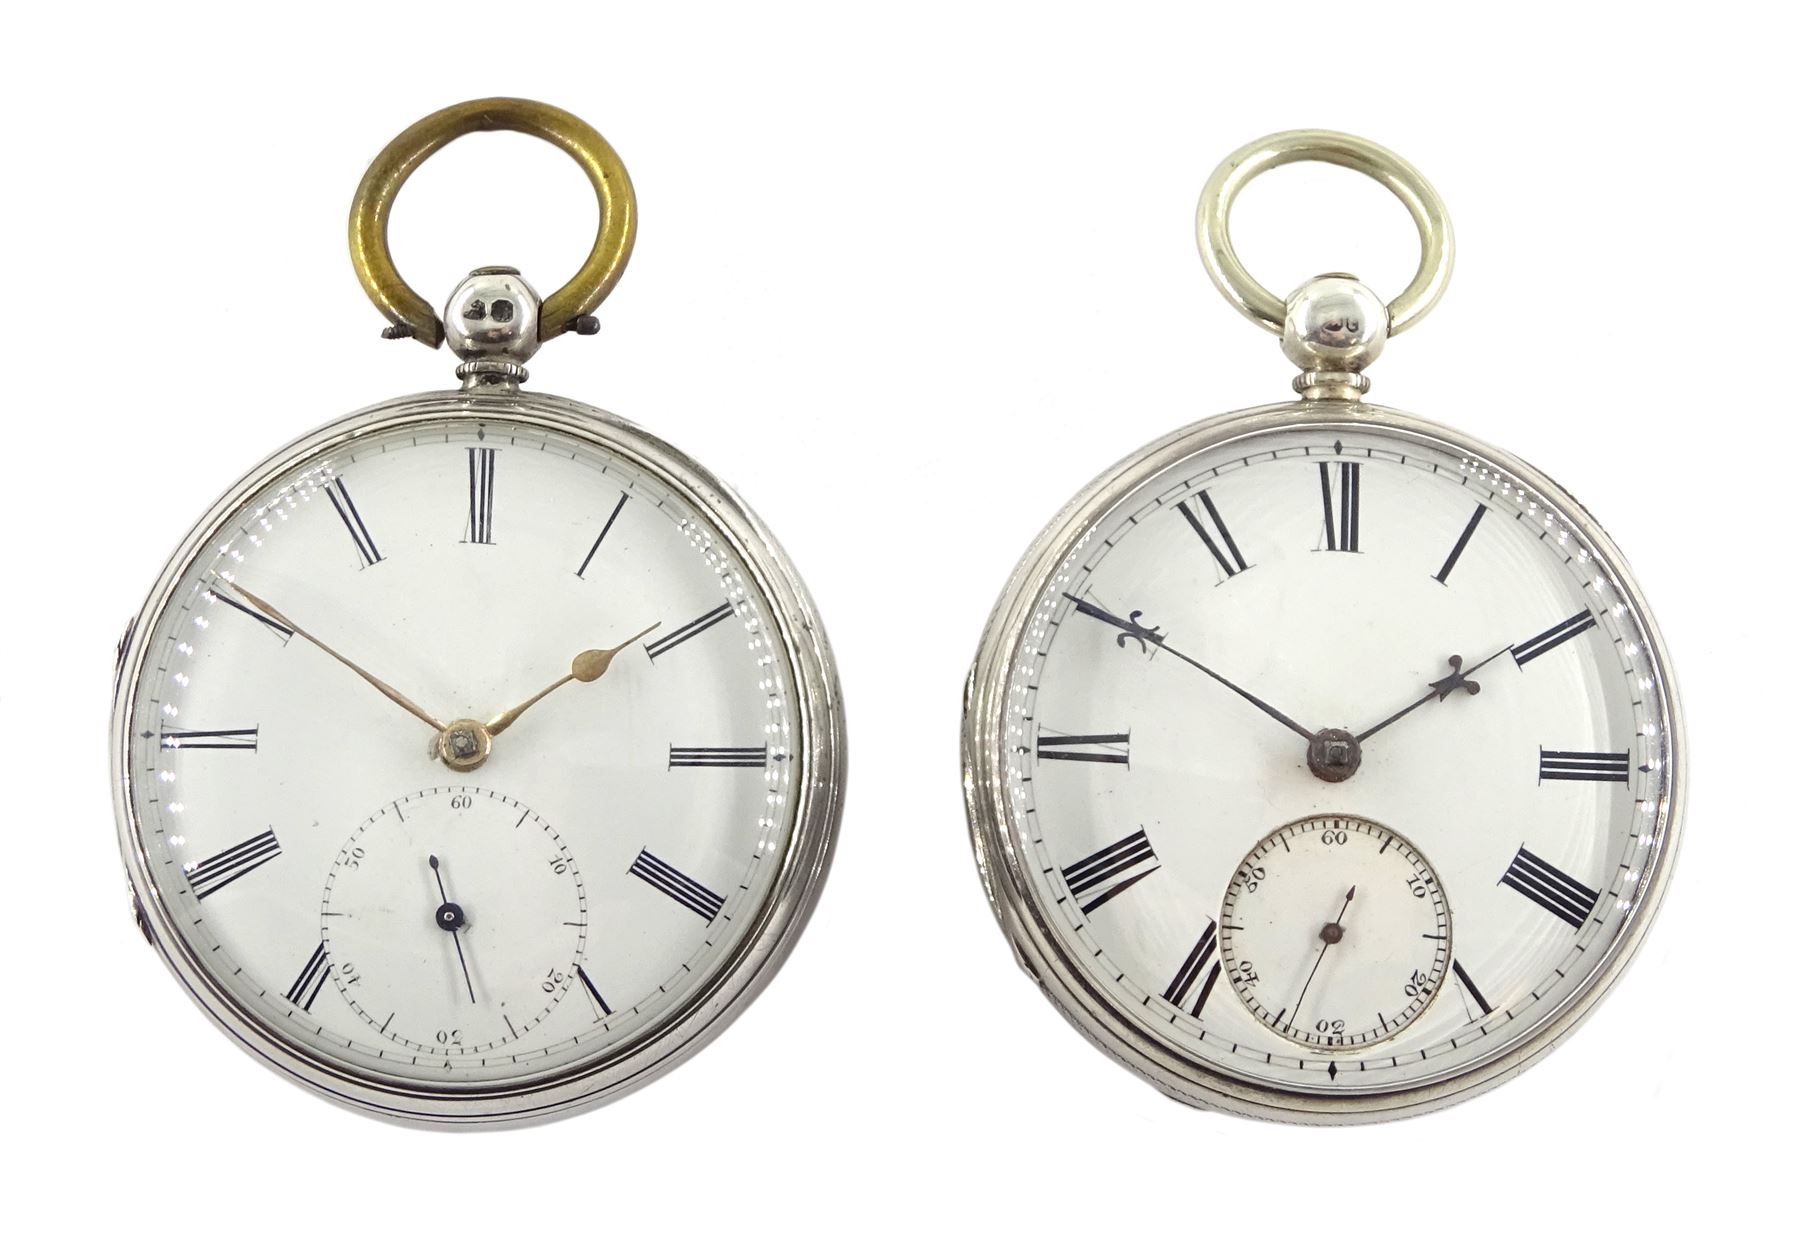 Two silver open face English lever fusee pocket watches, one numbered 14530, engraved balance cocks